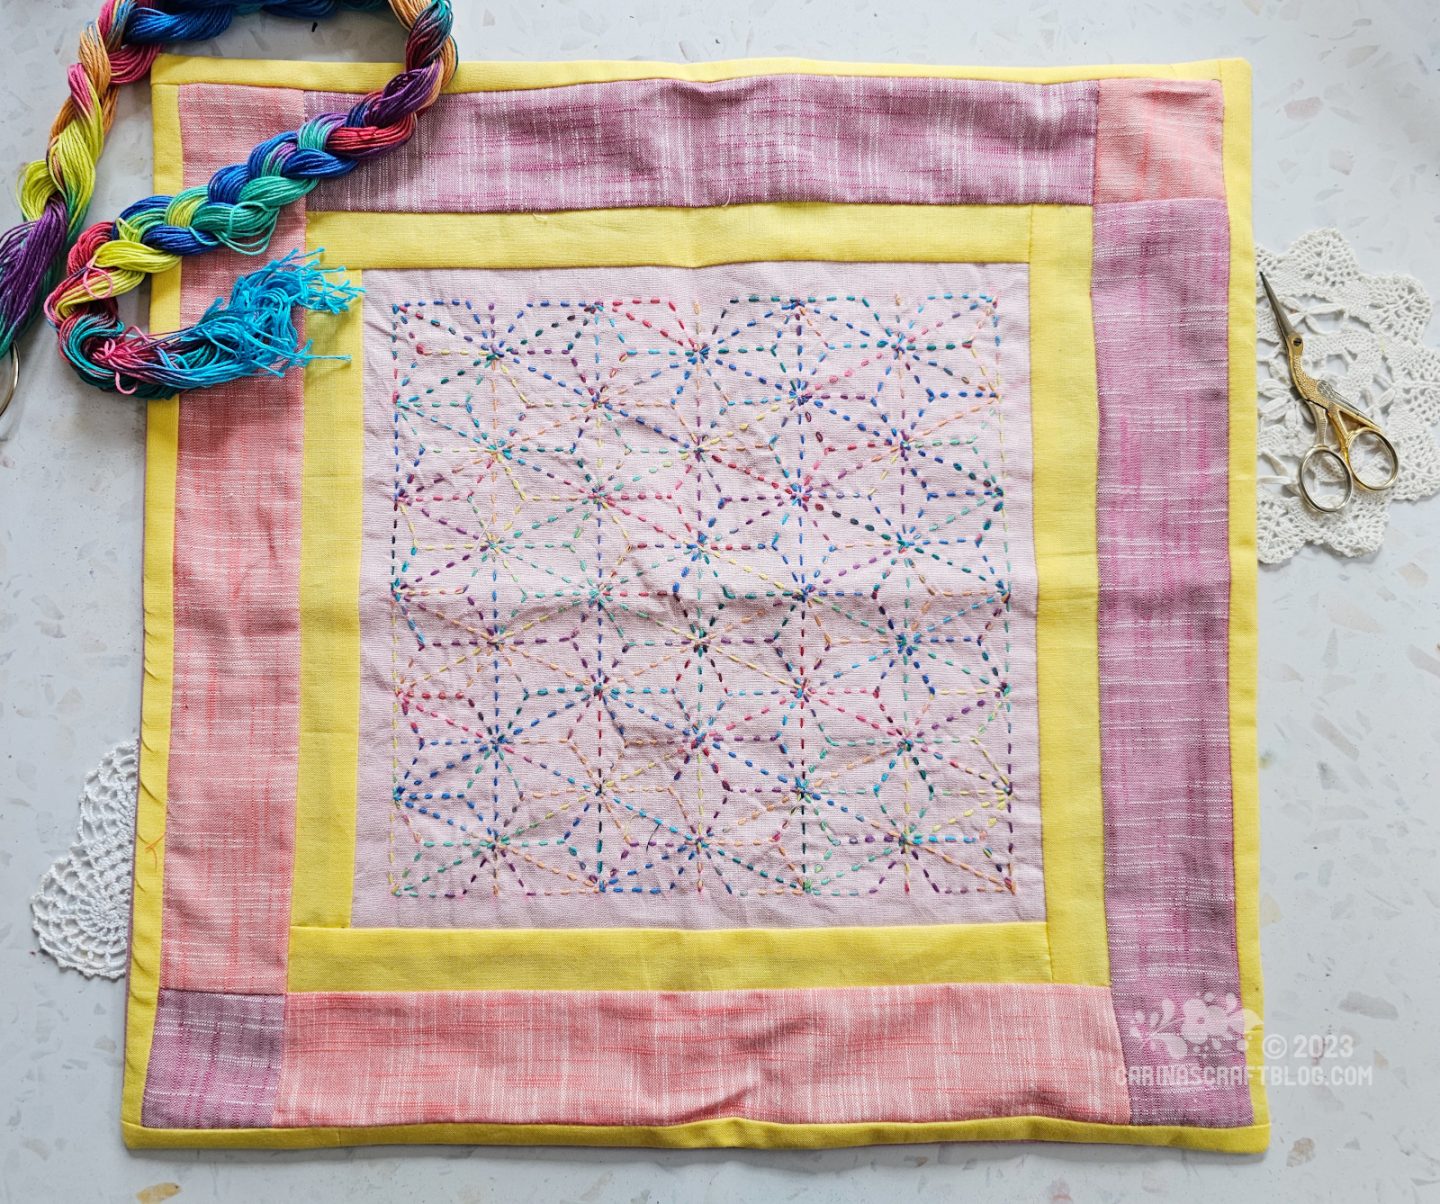 Overhead view of a cushion cover. It has an outer border in pink colours, a narrow inner border in bright yellow and a central panel in light pink with multicolour embroidery.